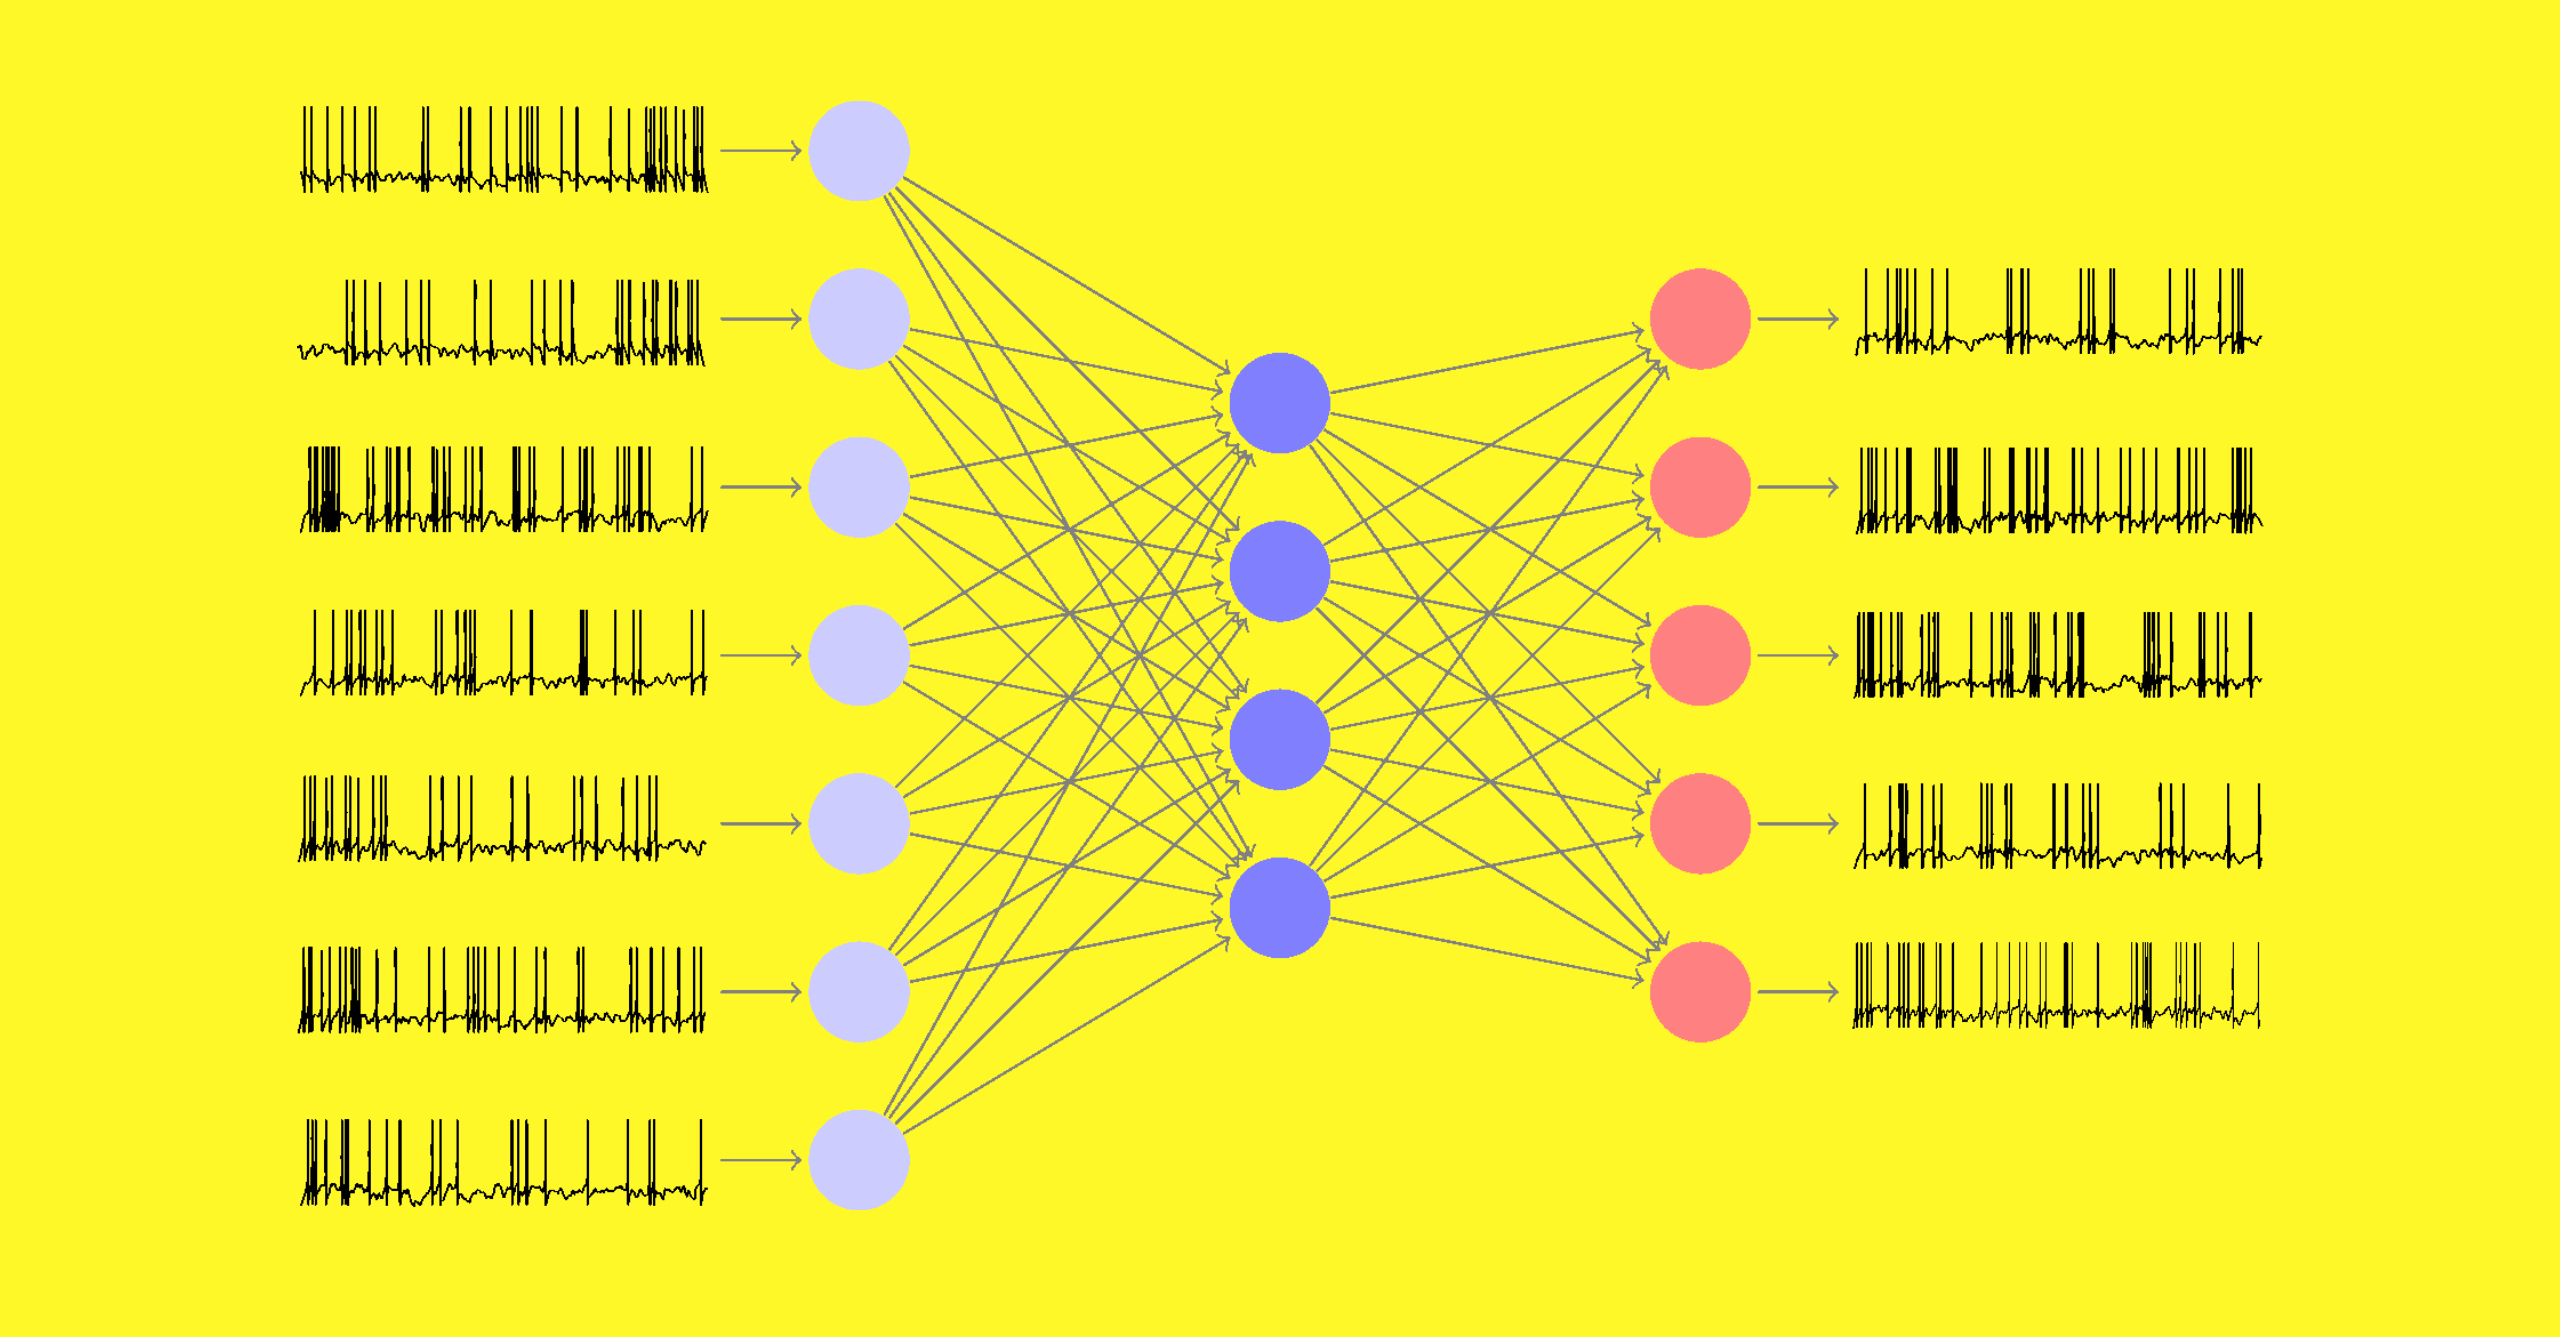 A Tutorial on Spiking Neural Networks for Beginners